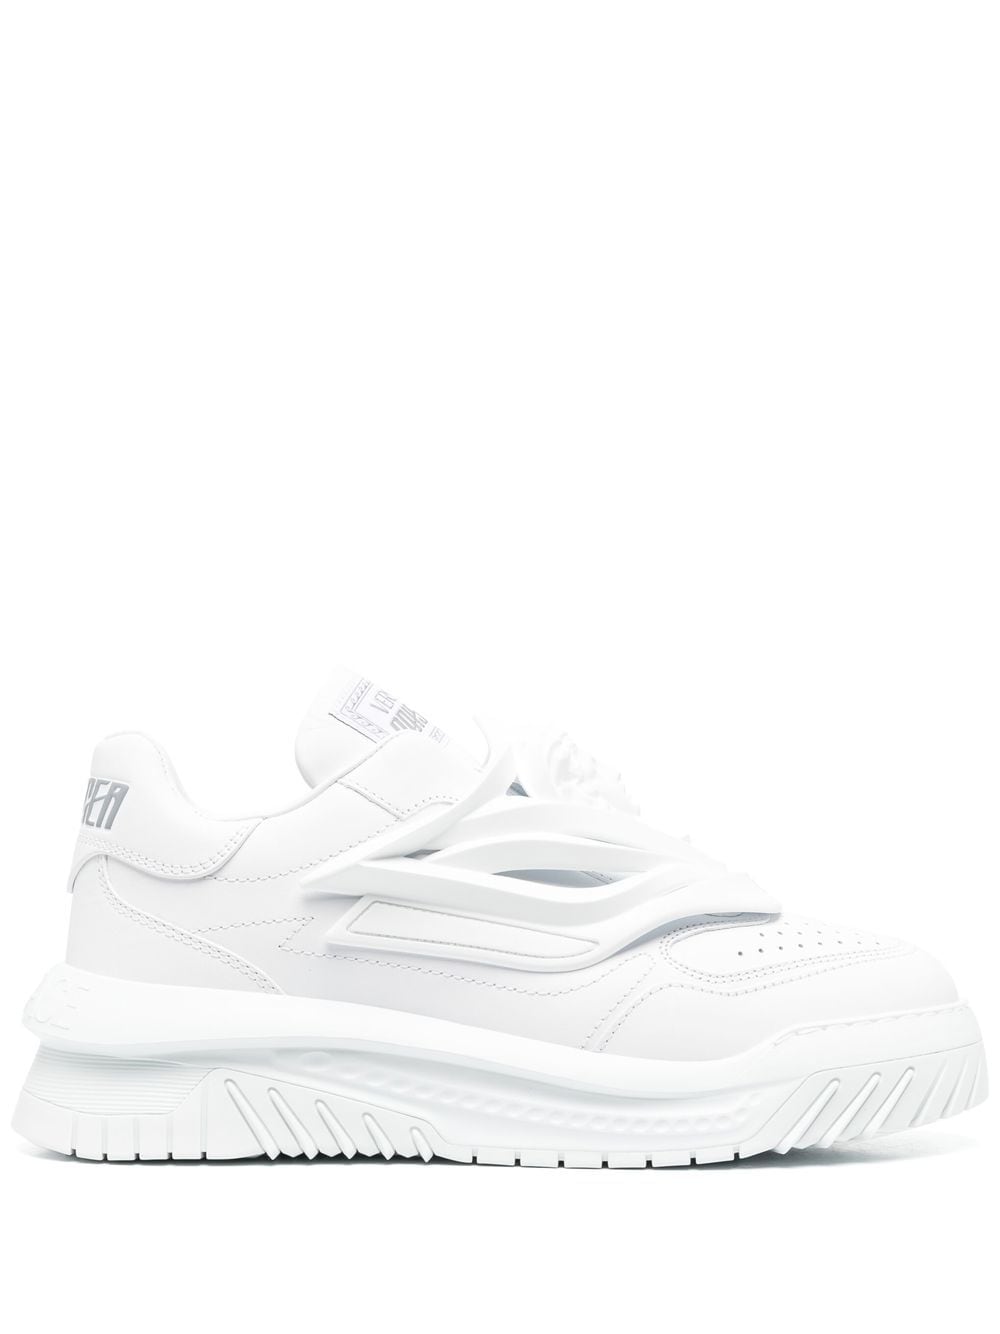 Versace Odissea low-top sneakers - White